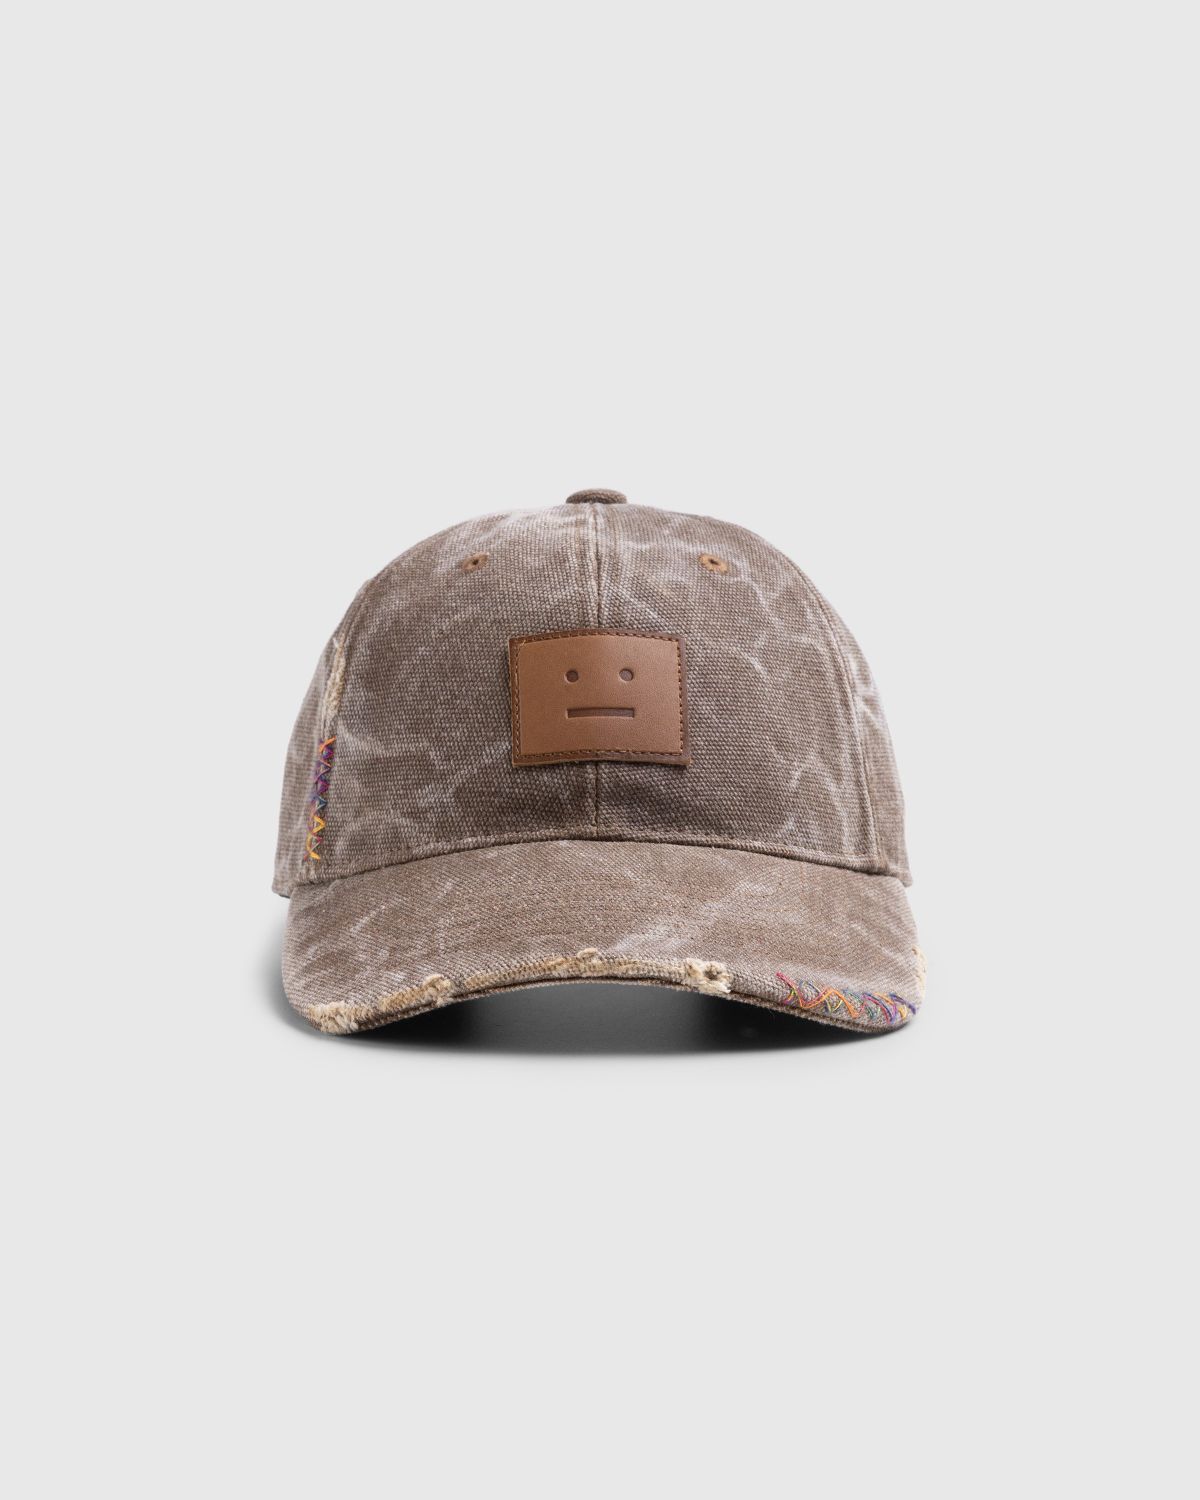 Studios Cap – Face Toffee Brown Patch Leather Acne | Highsnobiety Shop